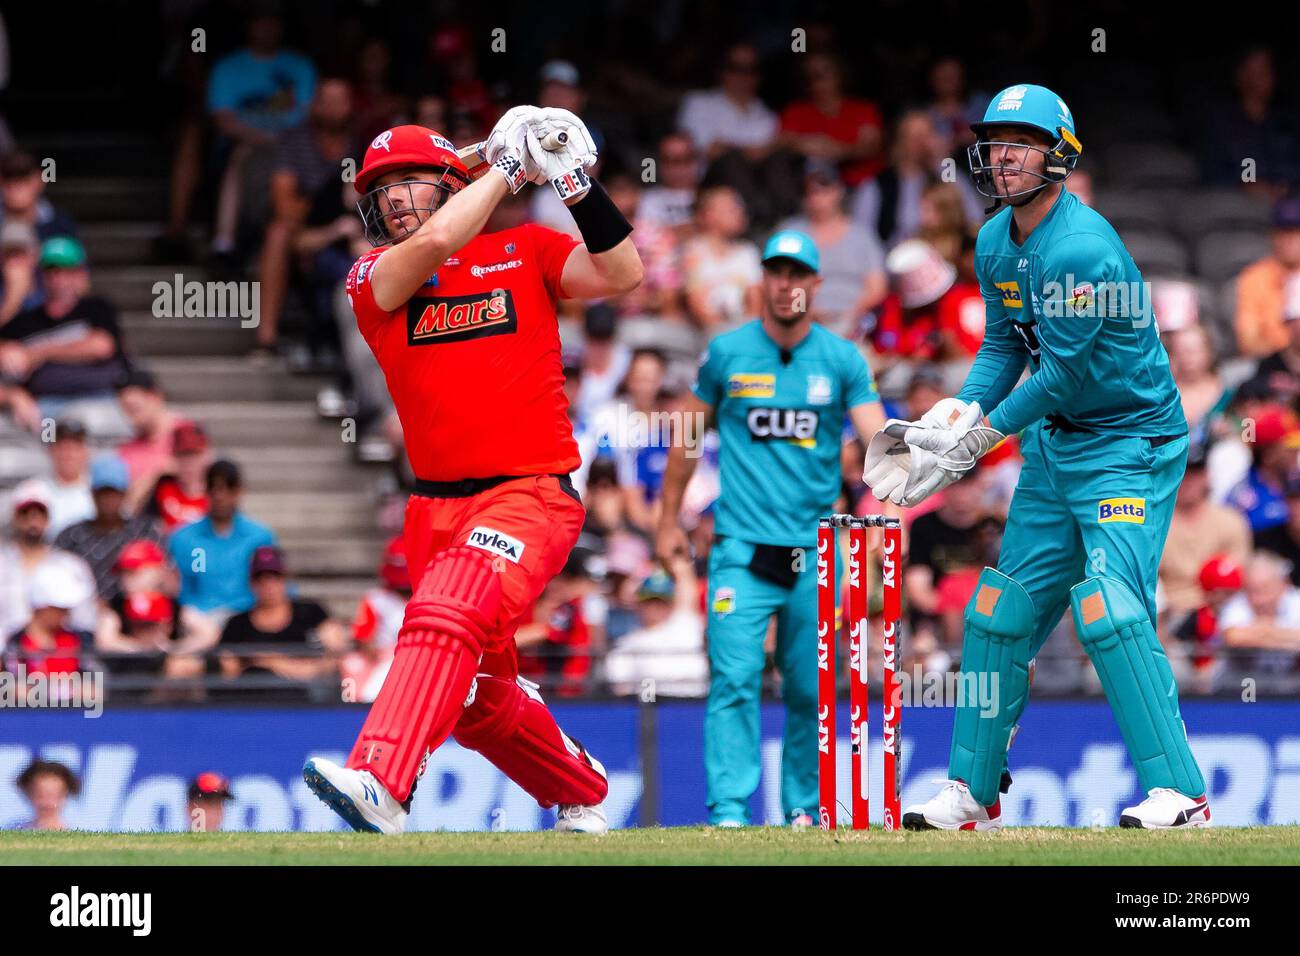 MELBOURNE, AUSTRALIA - JANUARY 27: Aaron Finch of Melbourne Renegades bats  during the Big Bash League cricket match between Melbourne Renegades and Brisbane Heat at Marvel Stadium on January 27, 2020 in Melbourne, Australia. Stock Photo